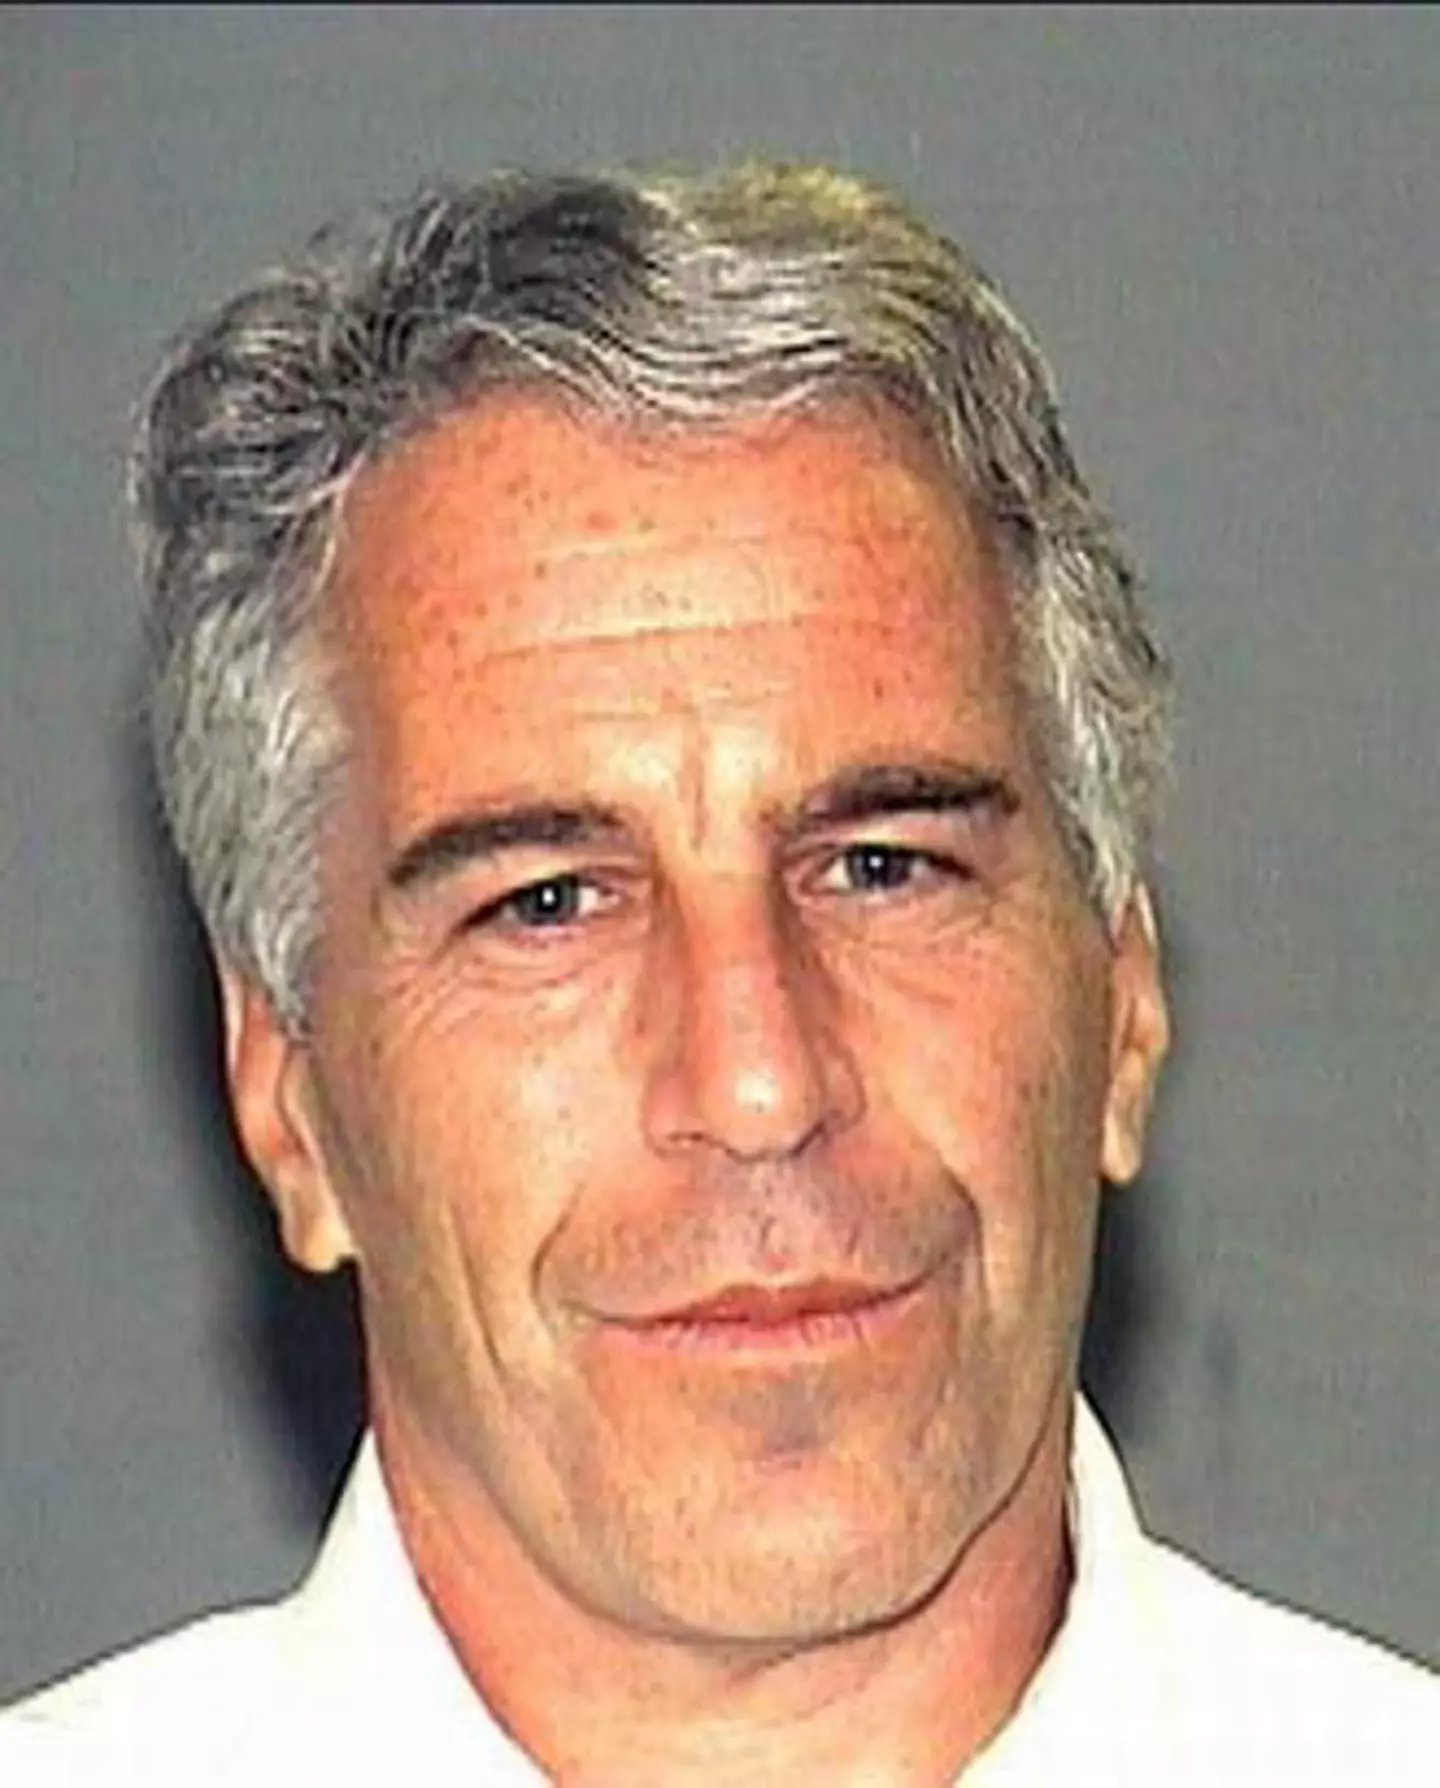 Jeffrey Epstein owned Little St. James from 1998 until his death in 2019.